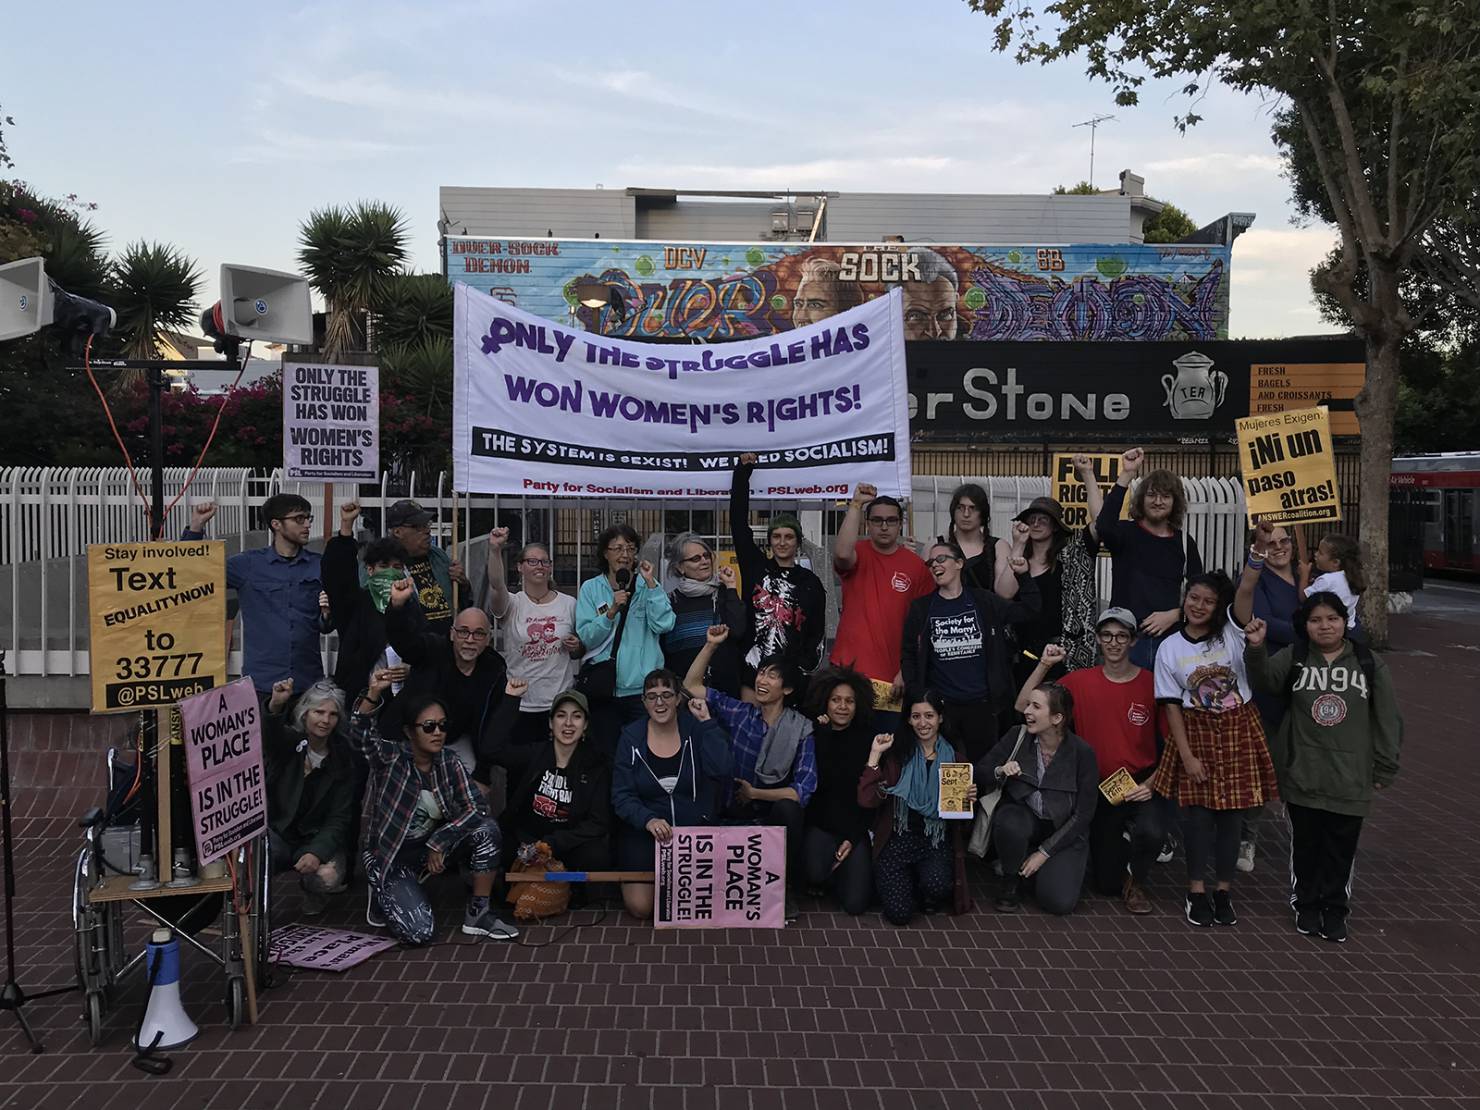 A group of activists, men and women, stand with fists raised in front of the 24th and Mission BART station in San Francisco. They hold a banner reading "Only the struggle has won women's rights!"